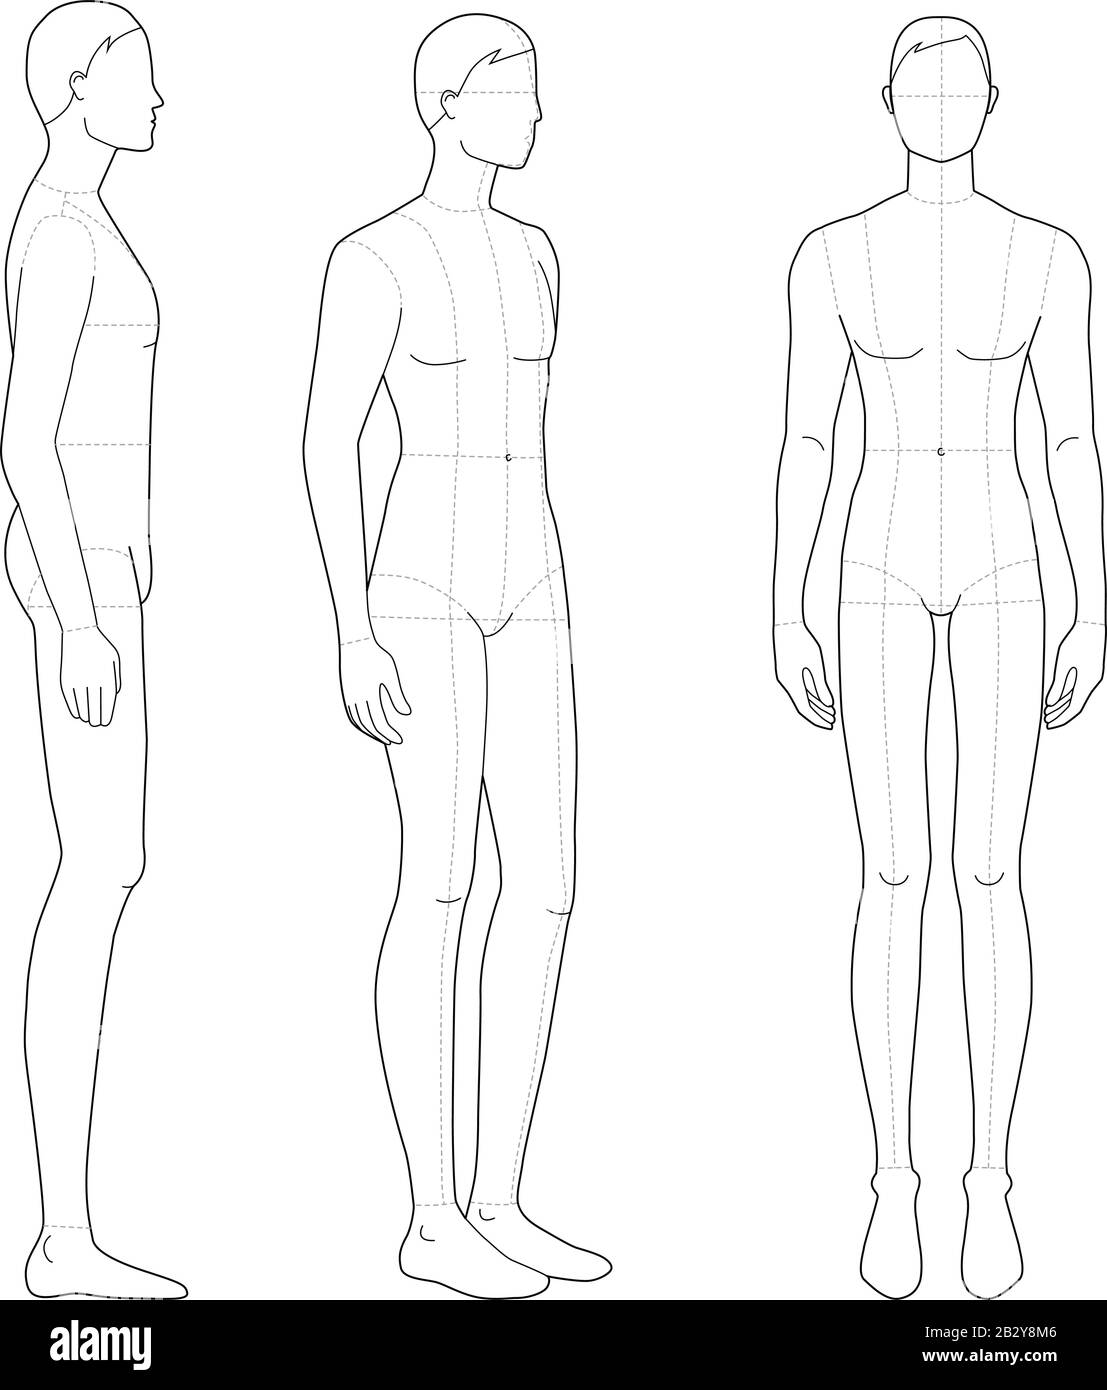 Fashion Template Of Standing Men In 3 Poses 9 Head Size For Technical Drawing With Main Lines Gentlemen Figure Front 3 4 And Side View Vector Outline Boy For Fashion Sketching And Illustration Isolated vector clip art illustration. https www alamy com fashion template of standing men in 3 poses 9 head size for technical drawing with main lines gentlemen figure front 3 4 and side view vector outline boy for fashion sketching and illustration image346036214 html